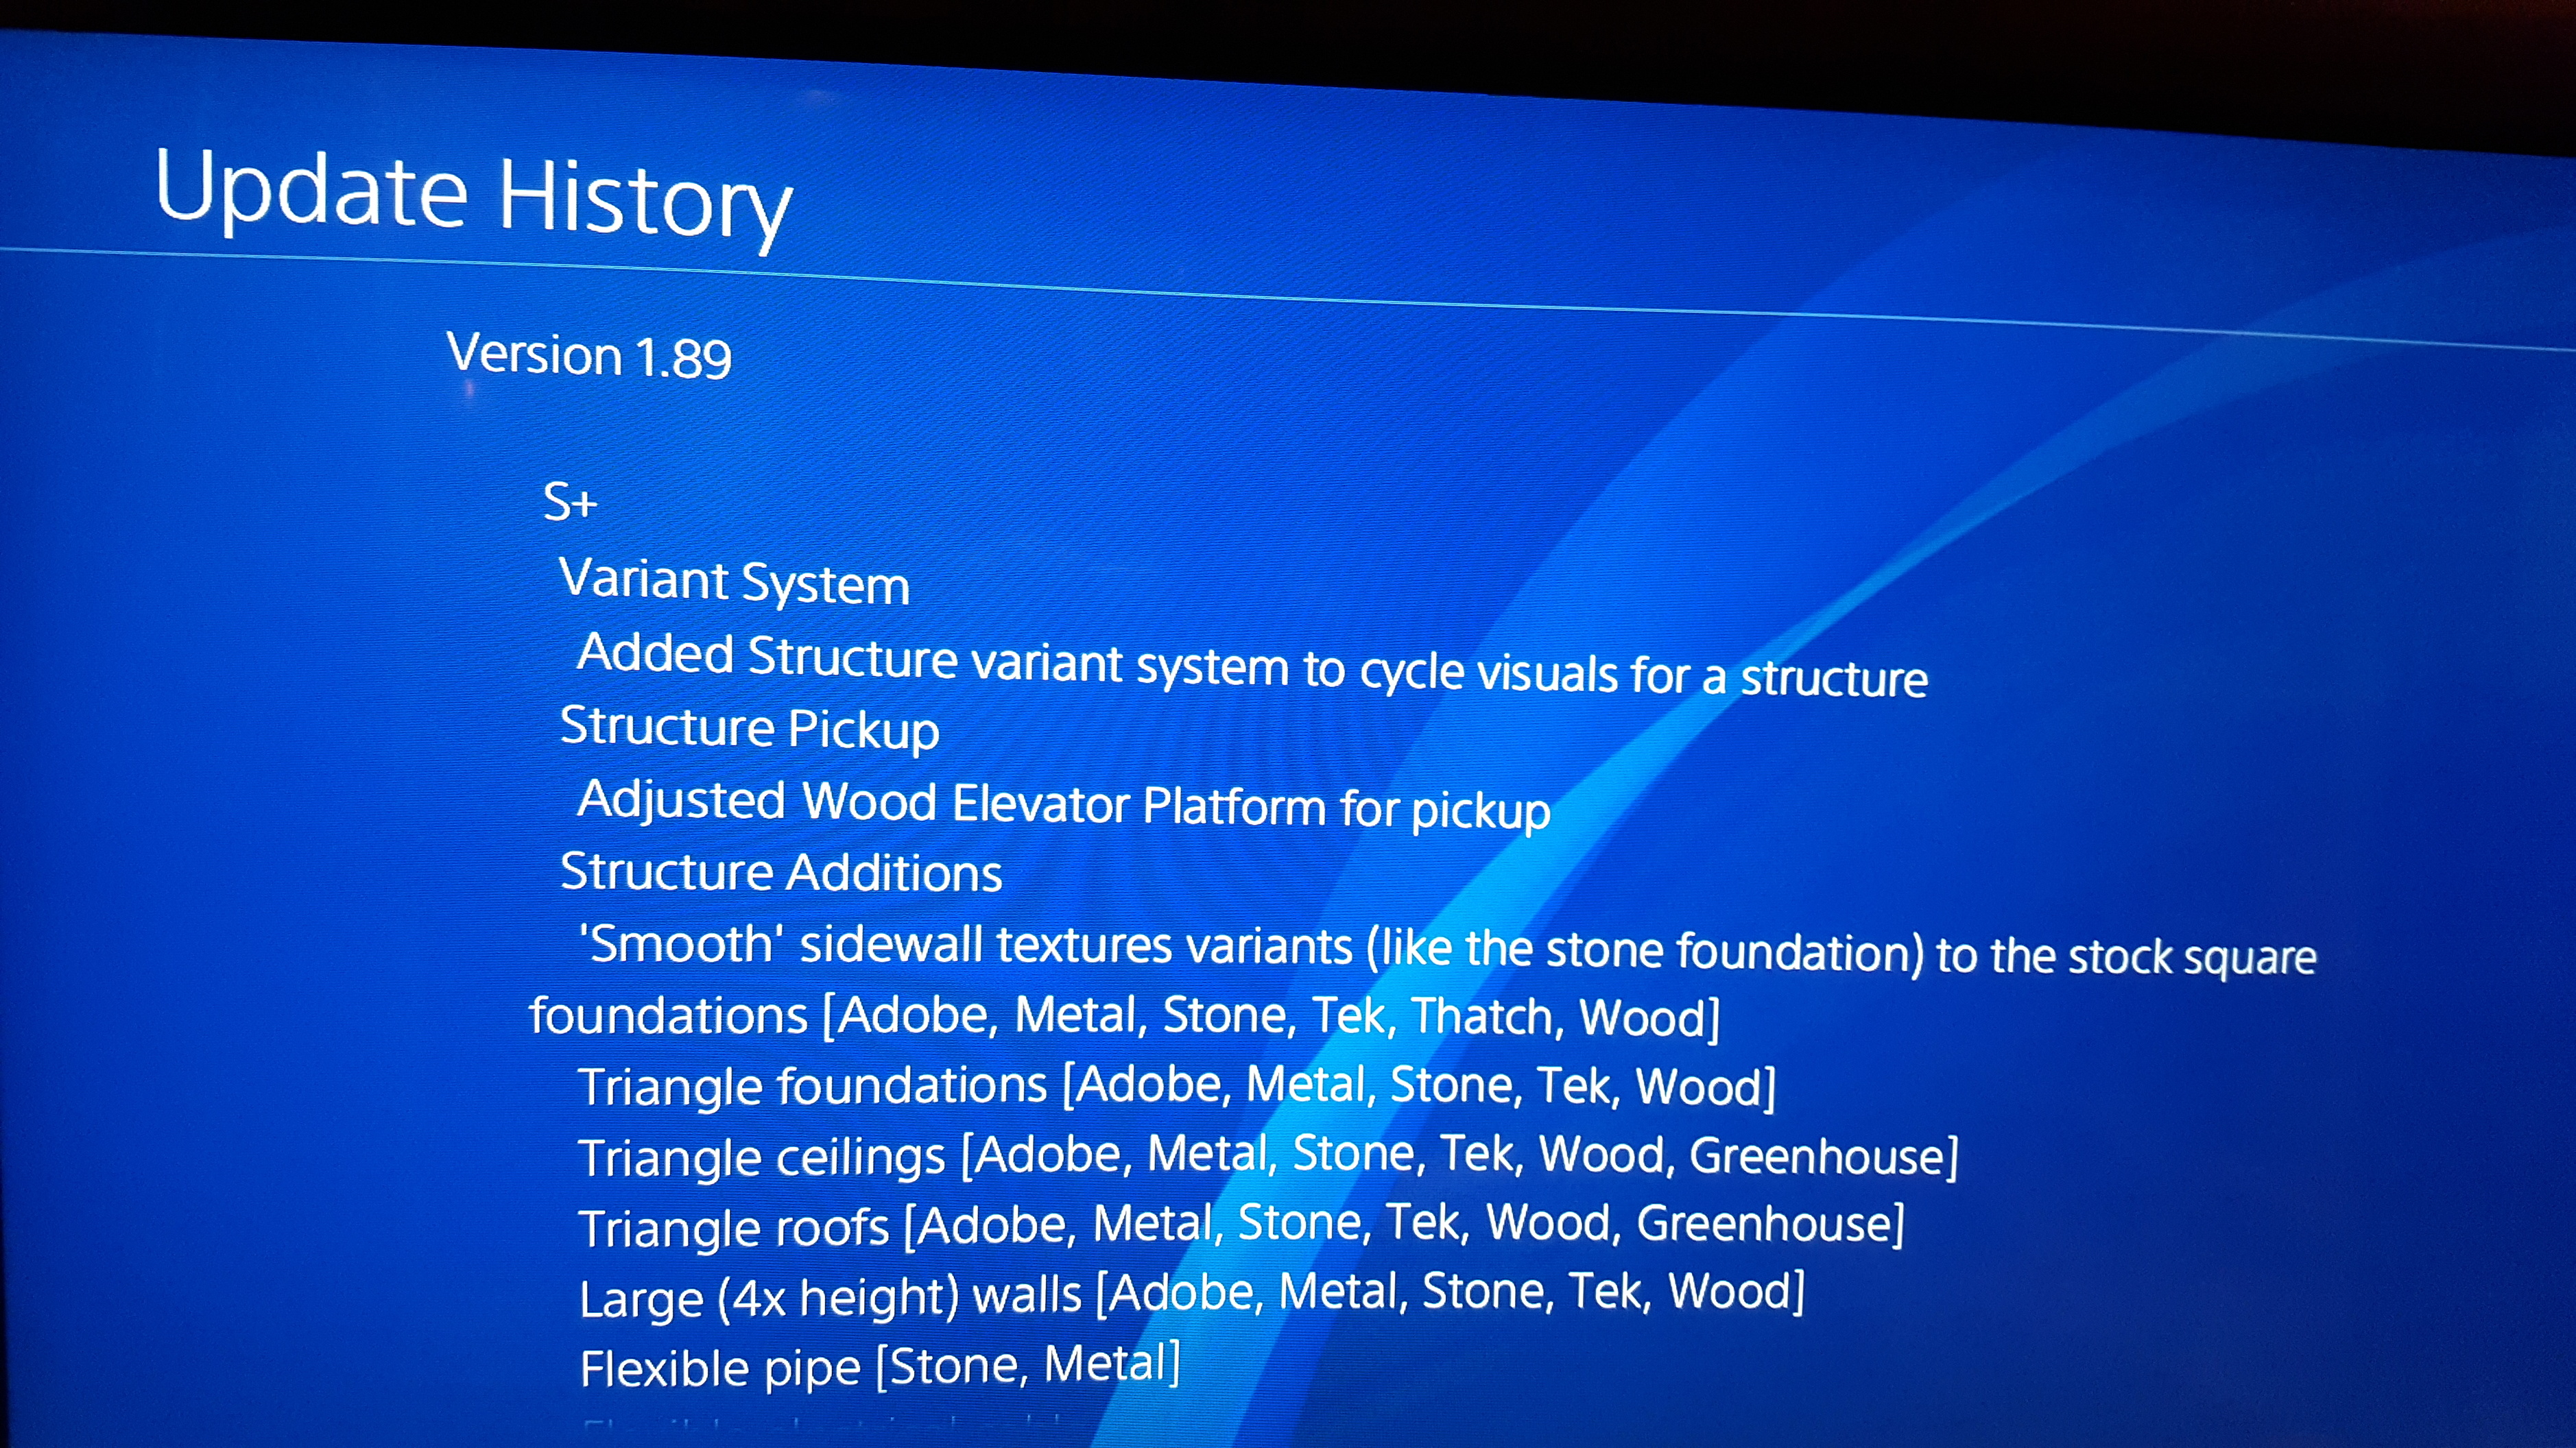 PS4 - include the 'Update History' - Boundless Community